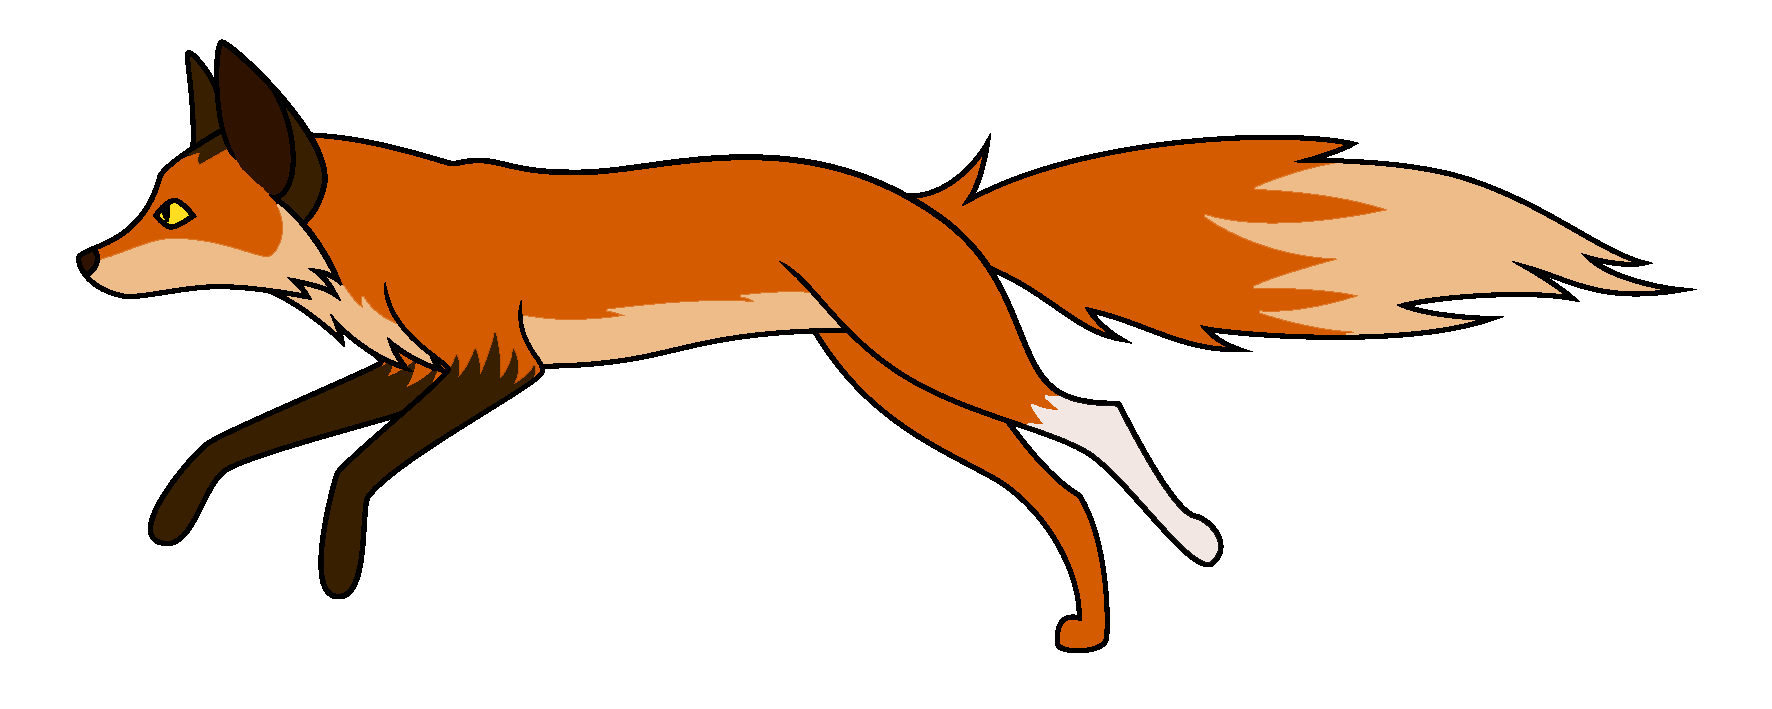 Woodland clipart animated fox. Animationplacementedit by cayfie d